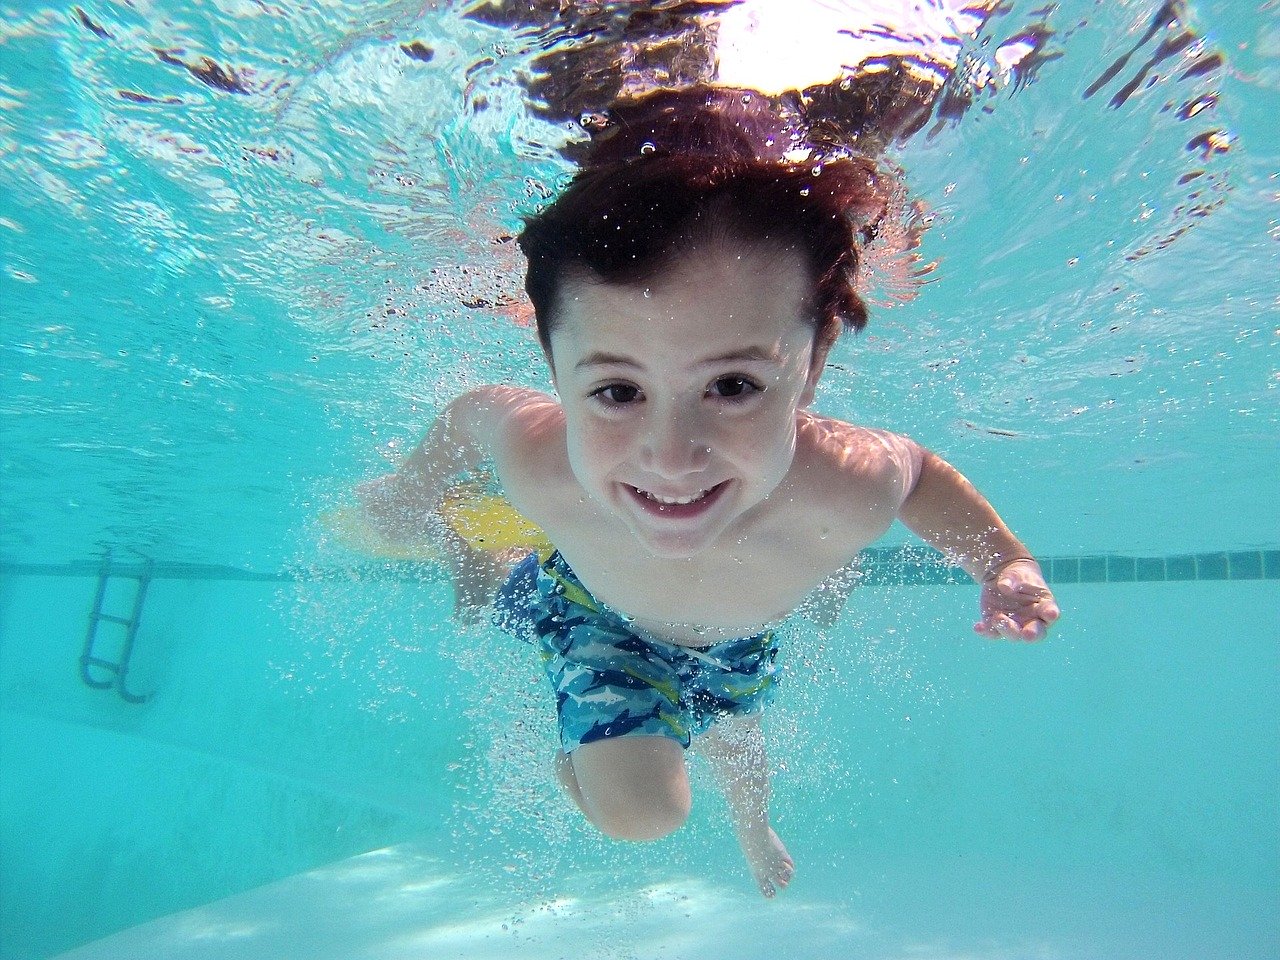 7 Tips for Kids to Safely Enjoy the Pool